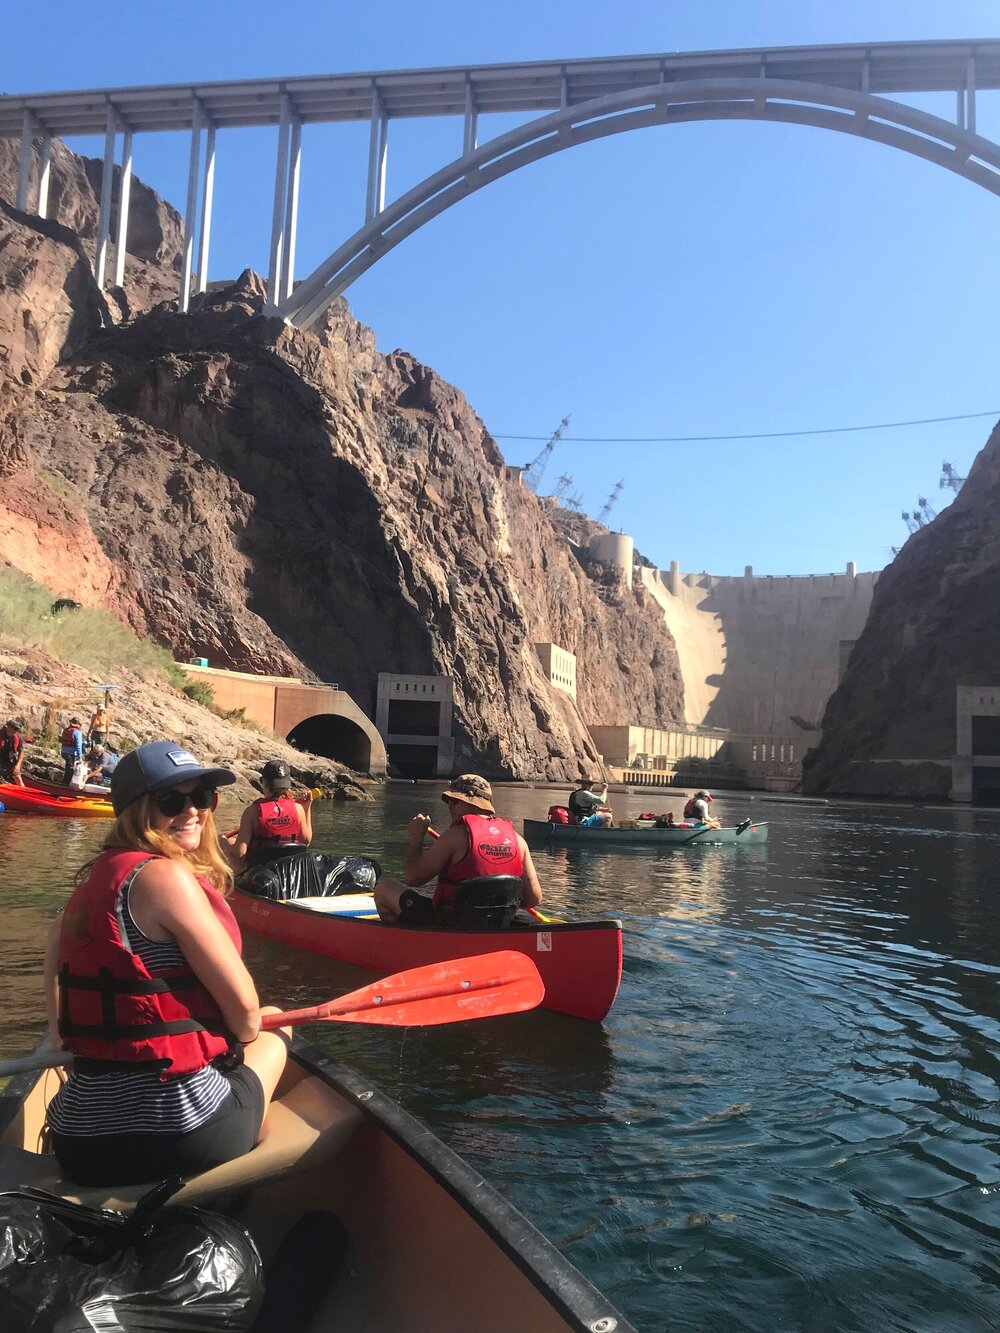  The first view from our launch spot at the magnificent  Hoover Dam  